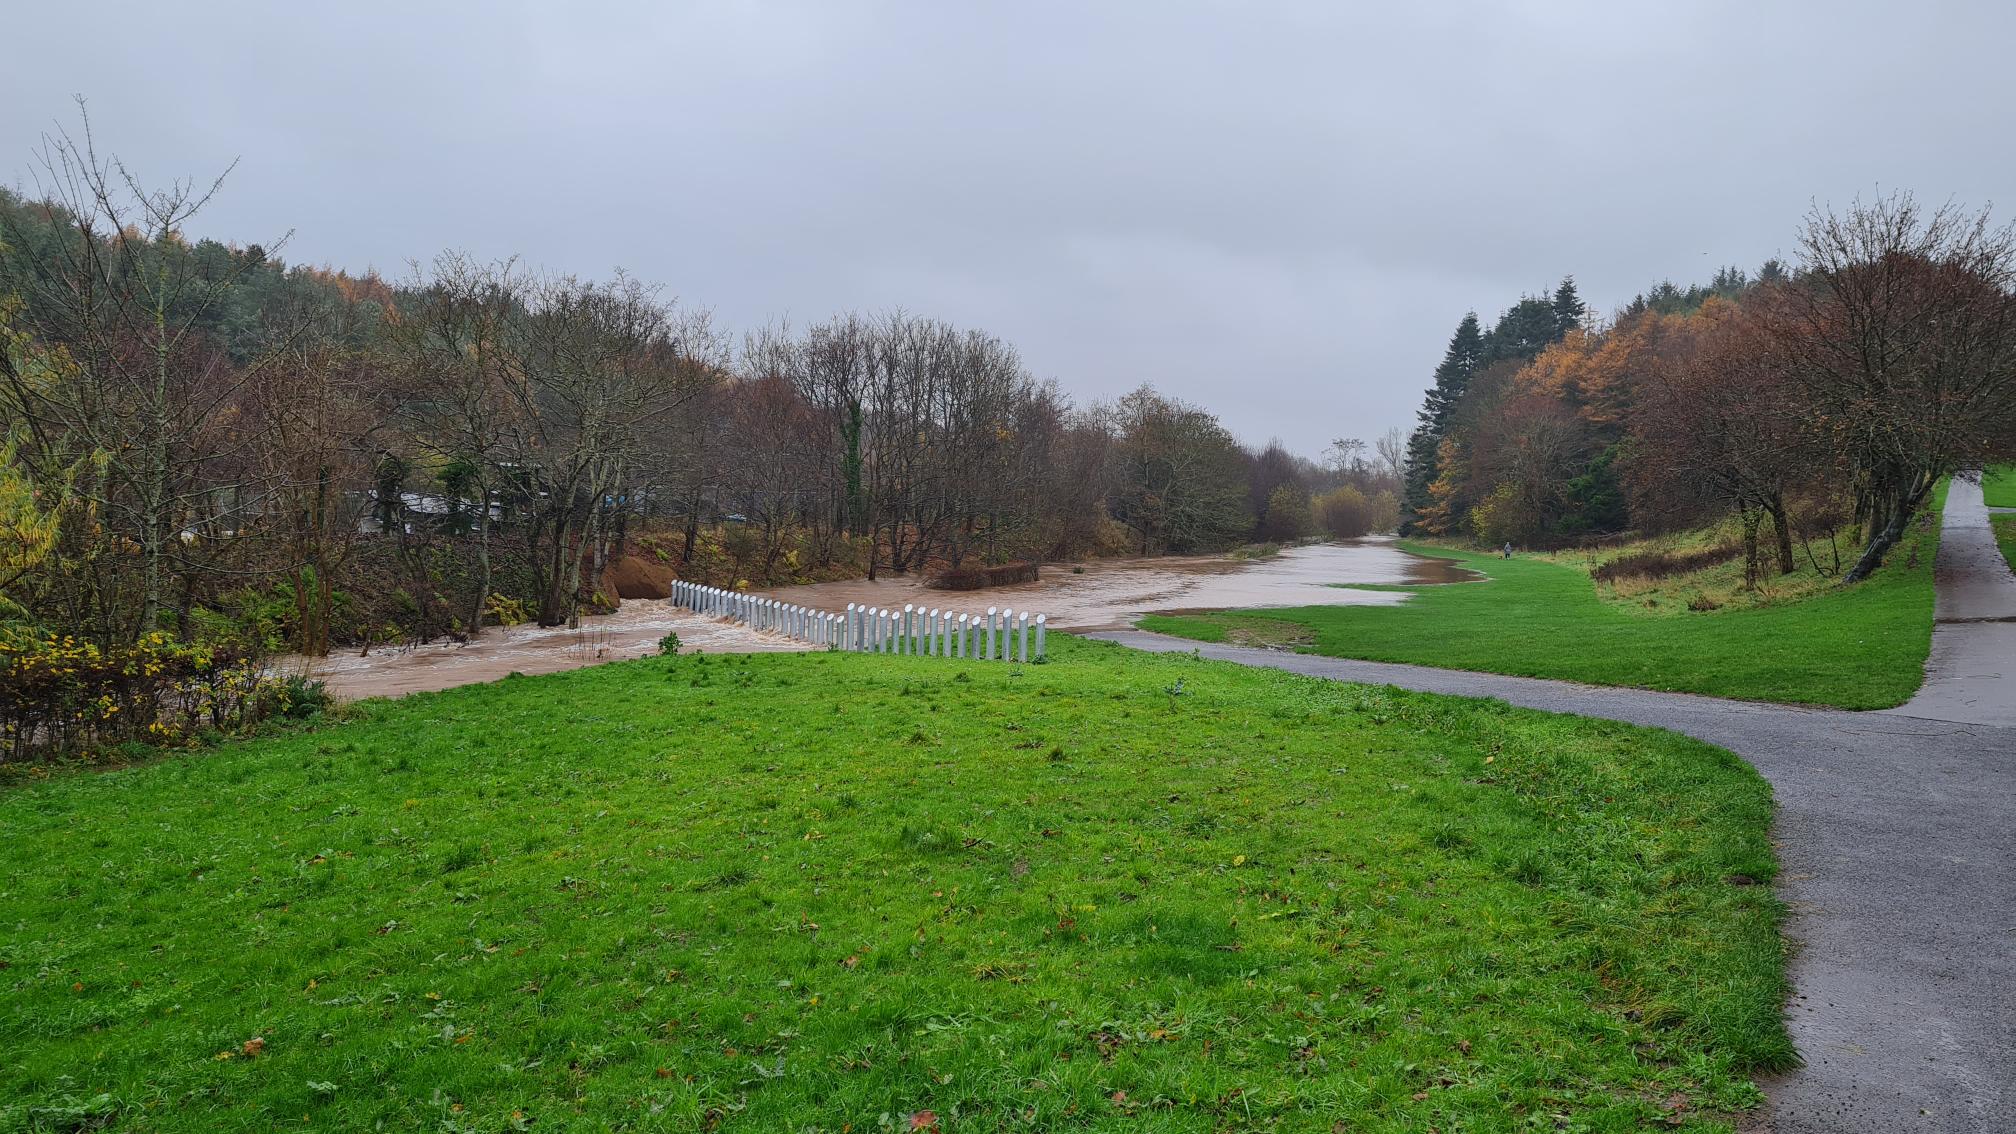 A view of operation 4 in The Dammy. This a low lying park area between Arbroath and St Vigeans where there is no river wall or deep bank and this area is a natural flood plain, so the design allows for water to lie here during flood events. Debris posts have been put in to catch large debris before it goes in to the river through Arbroath.